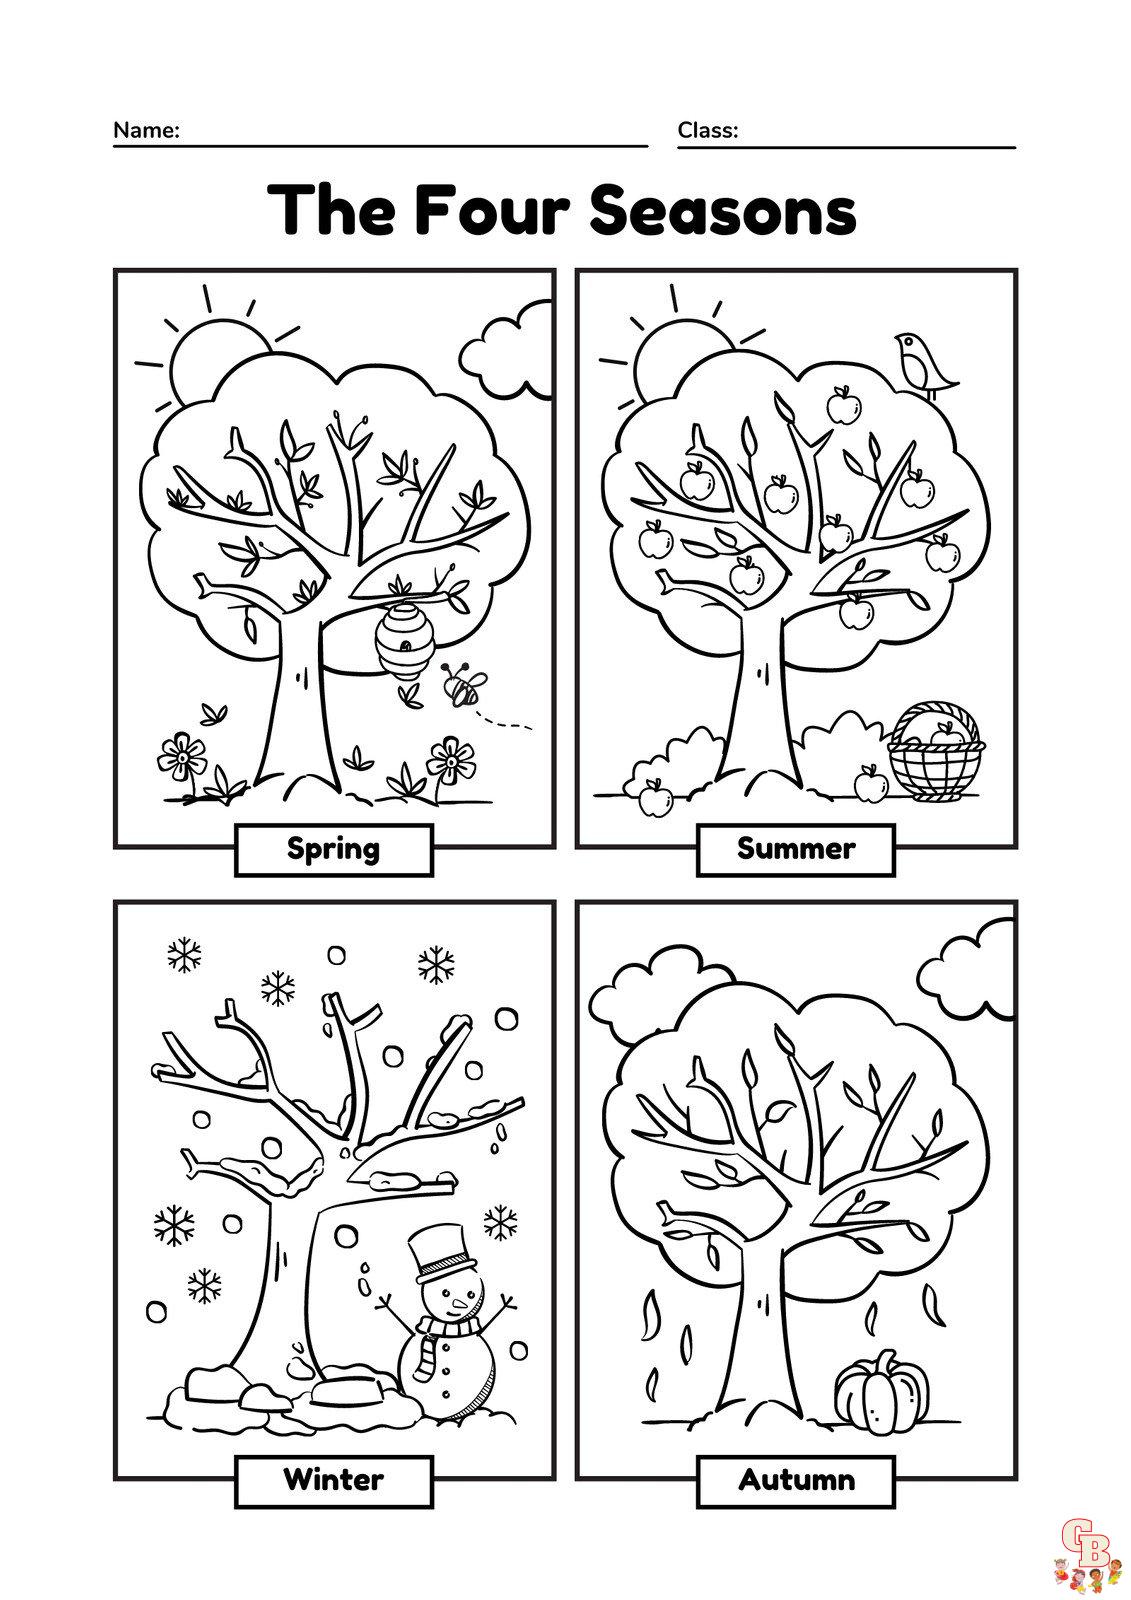 Celebrate the Changing Seasons with Seasons Coloring Pages